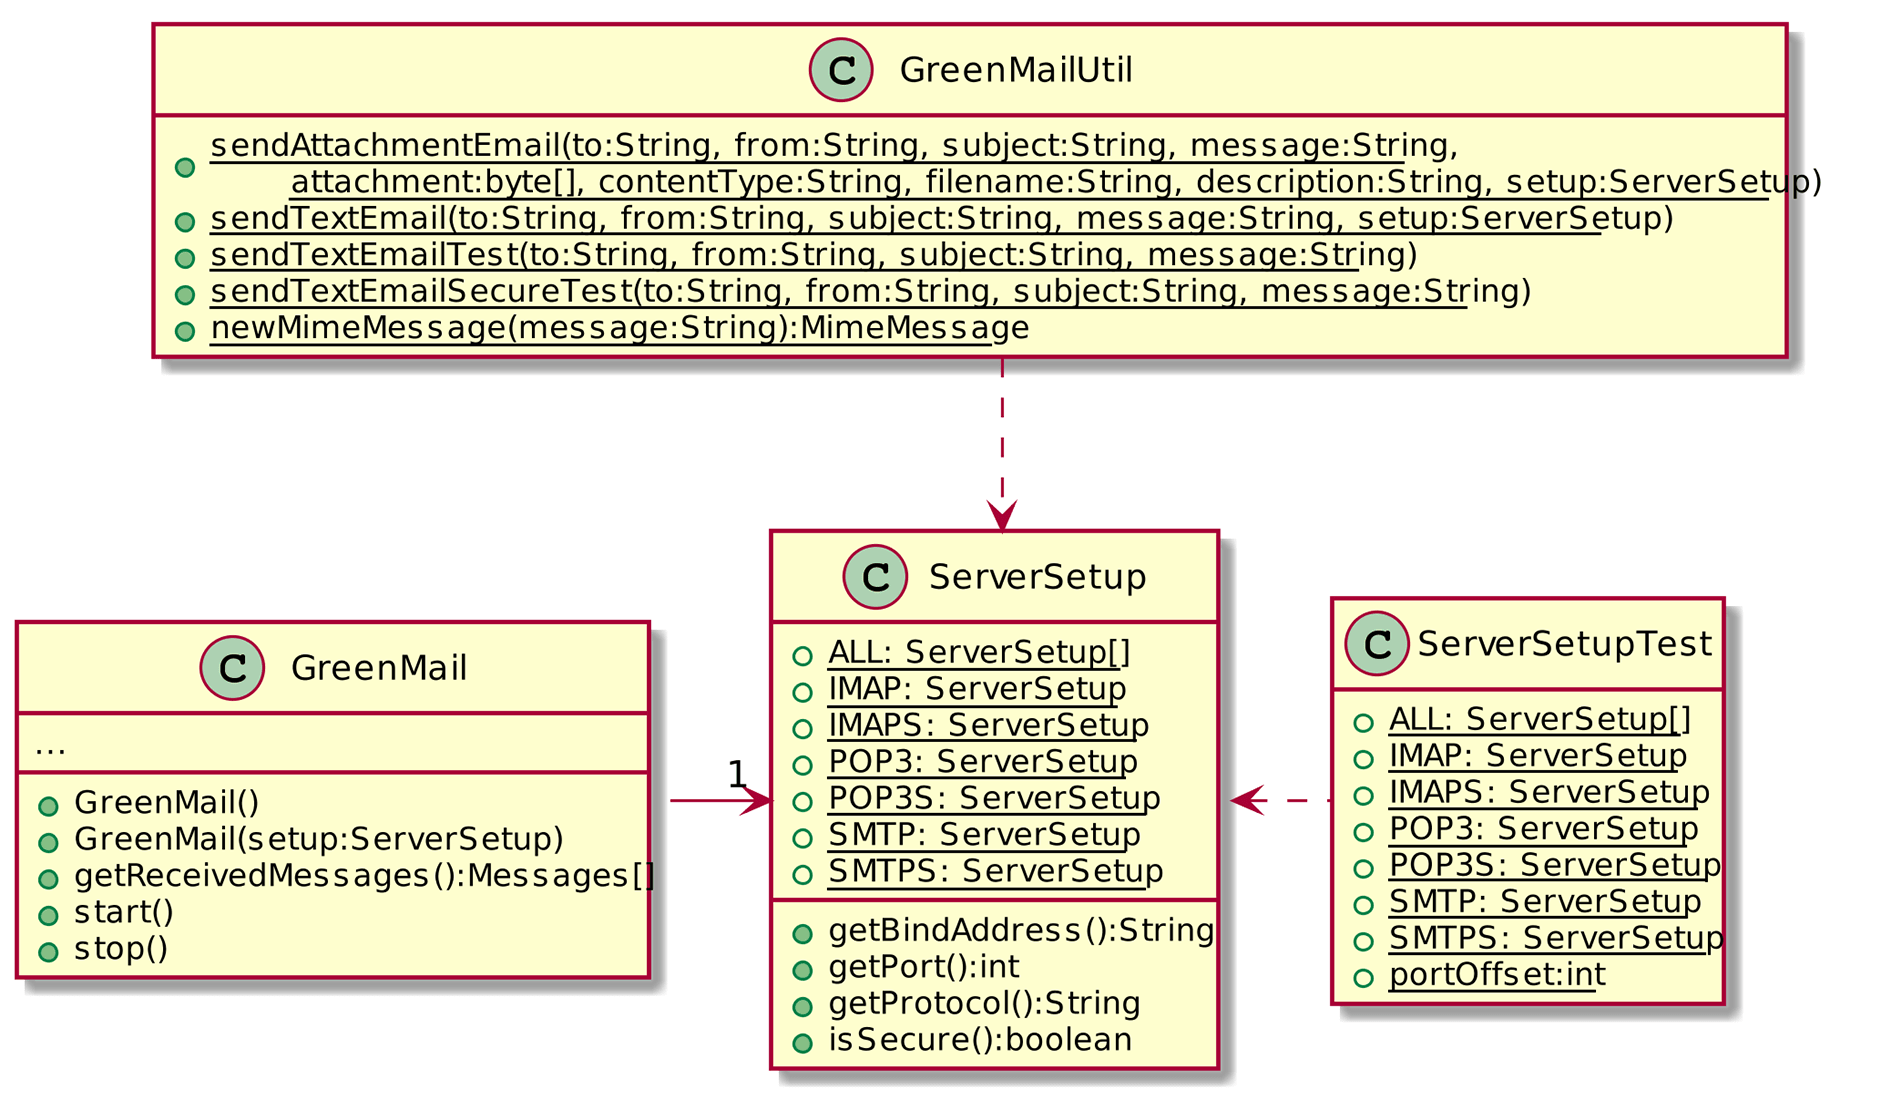 Fig. 5.9 - Green mail core classes